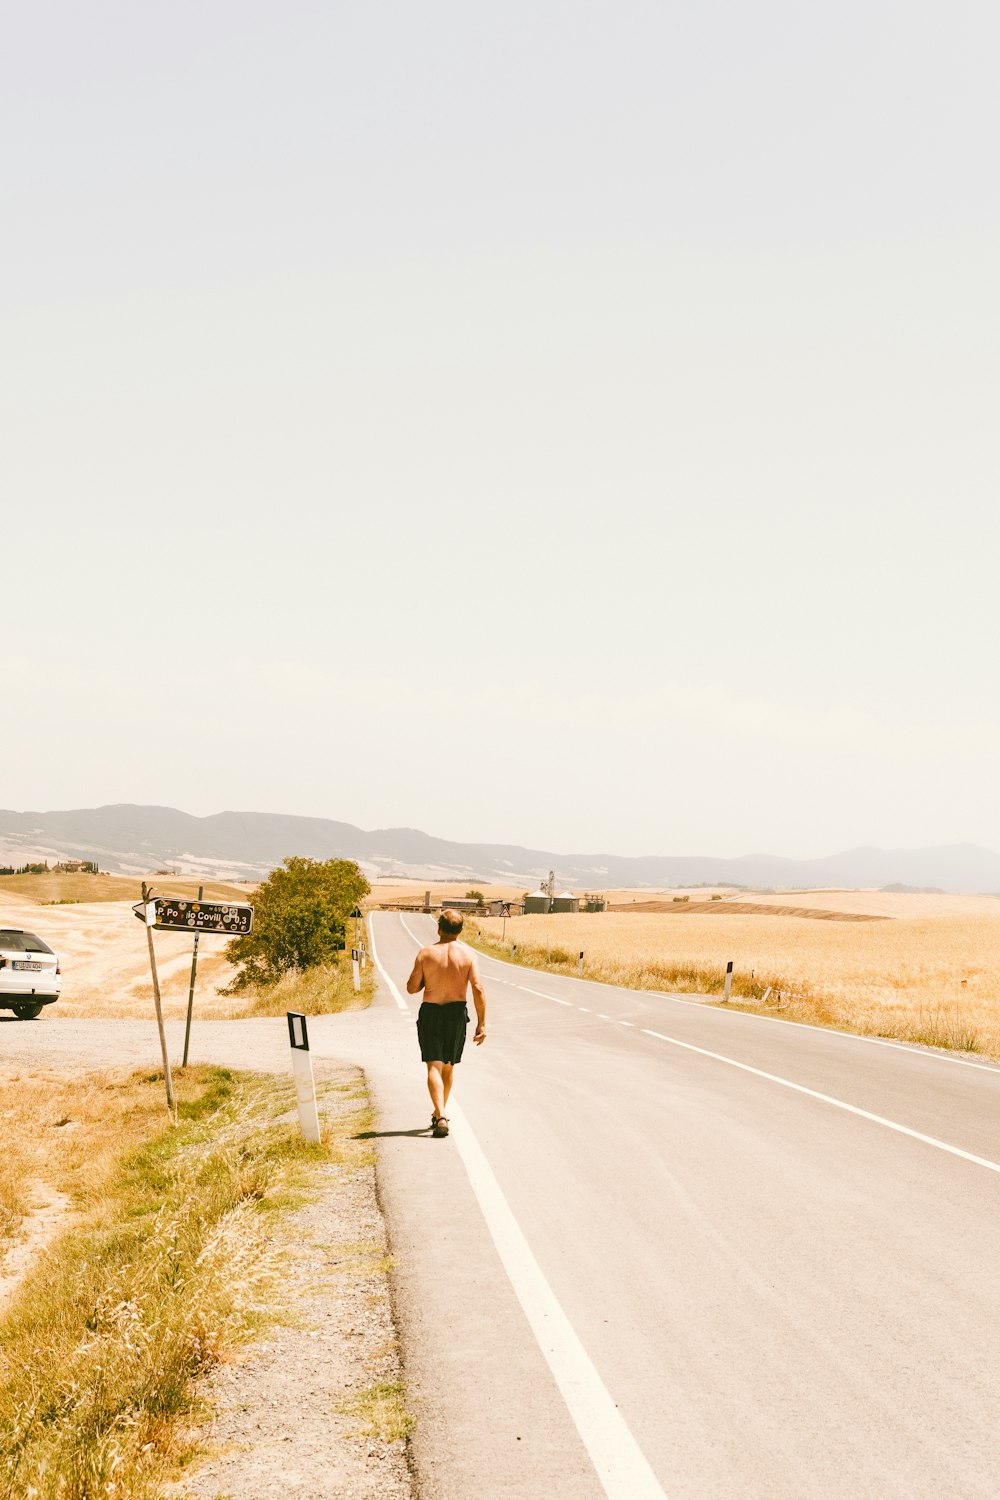 a person running on a road